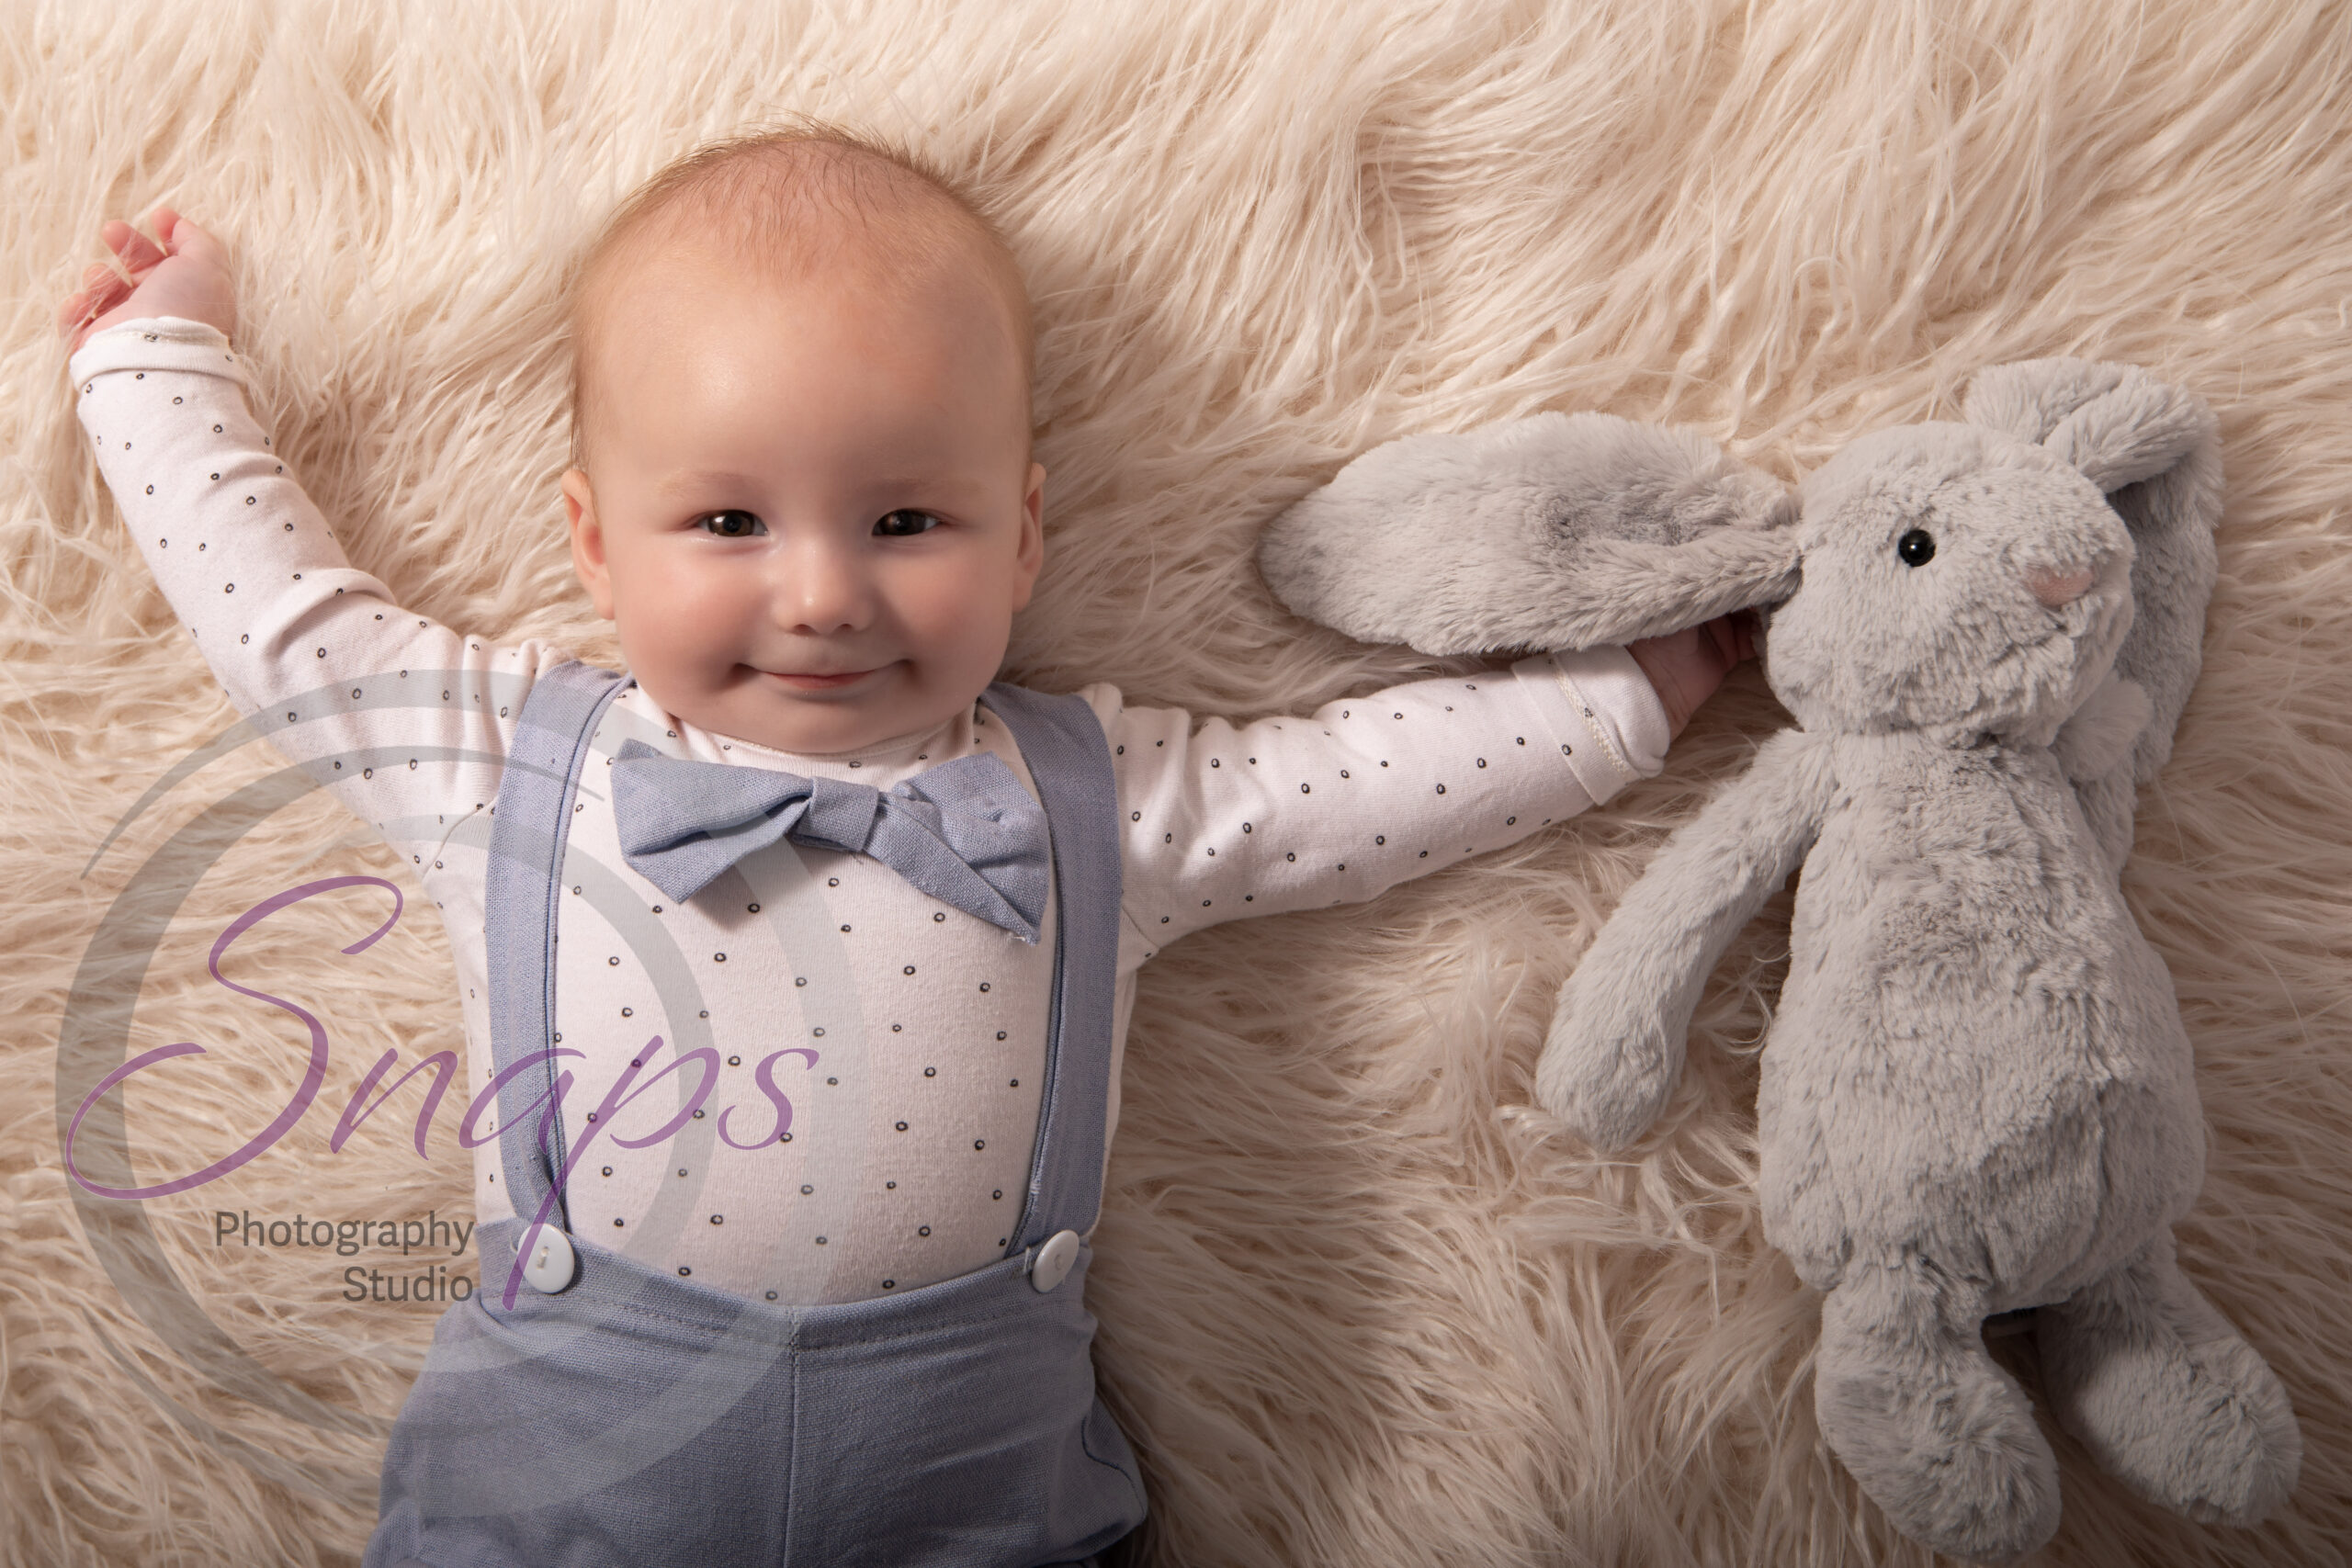 little baby boy wearing a blue bow tie and matching dungarees lead on a white fluffy rug and smiling next to his grey bunny rabbit.